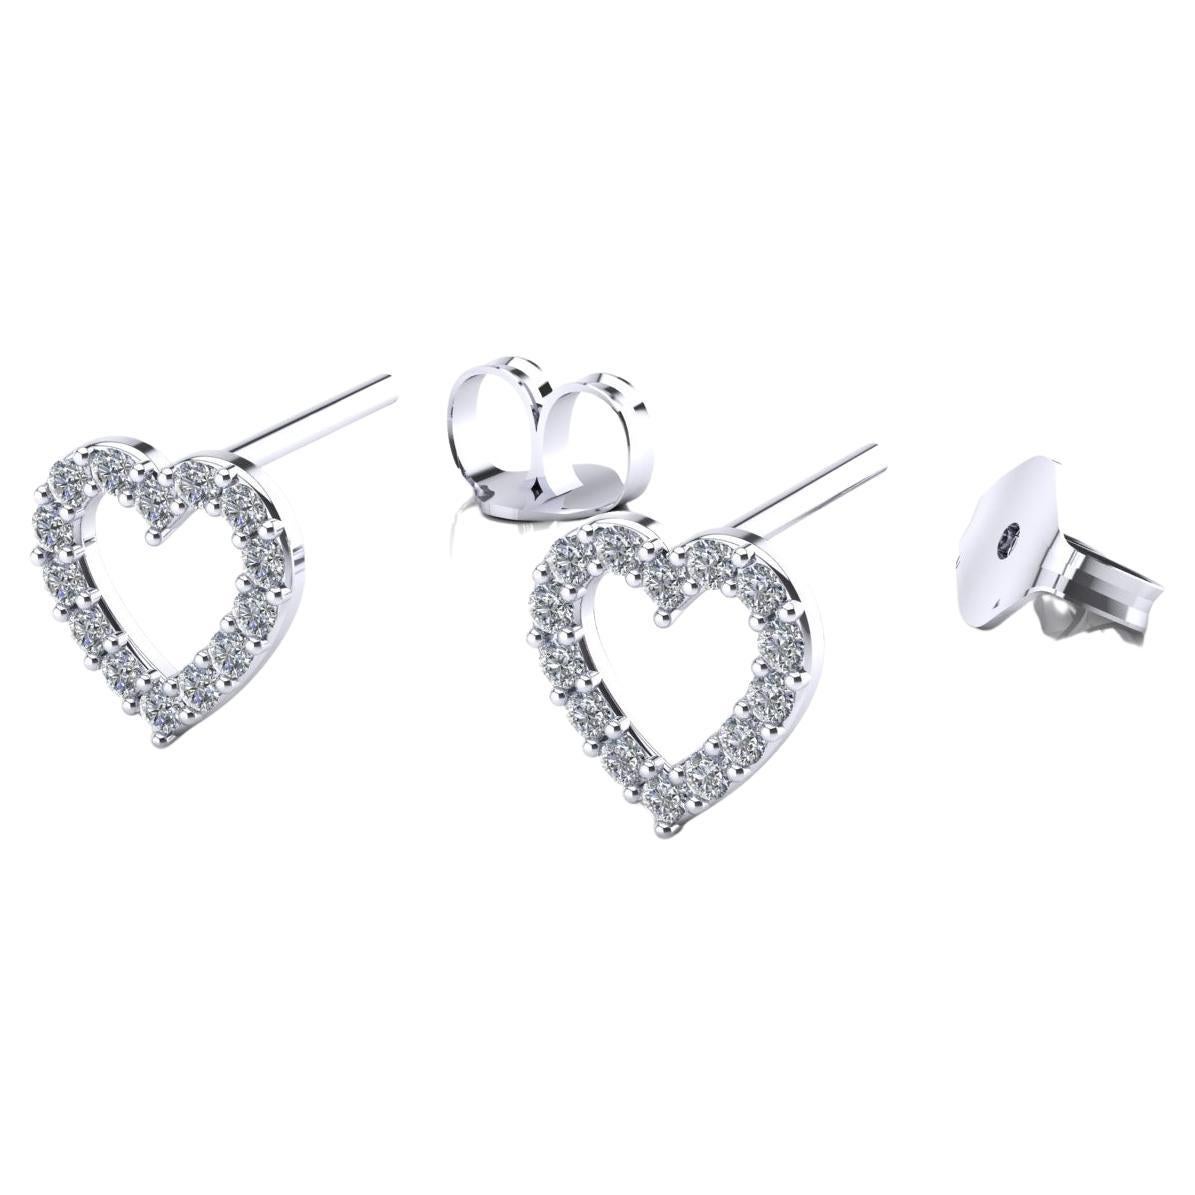 Fantasy Earrings "HEART" with Natural Diamonds, White Gold 18kt, Made in Italy For Sale